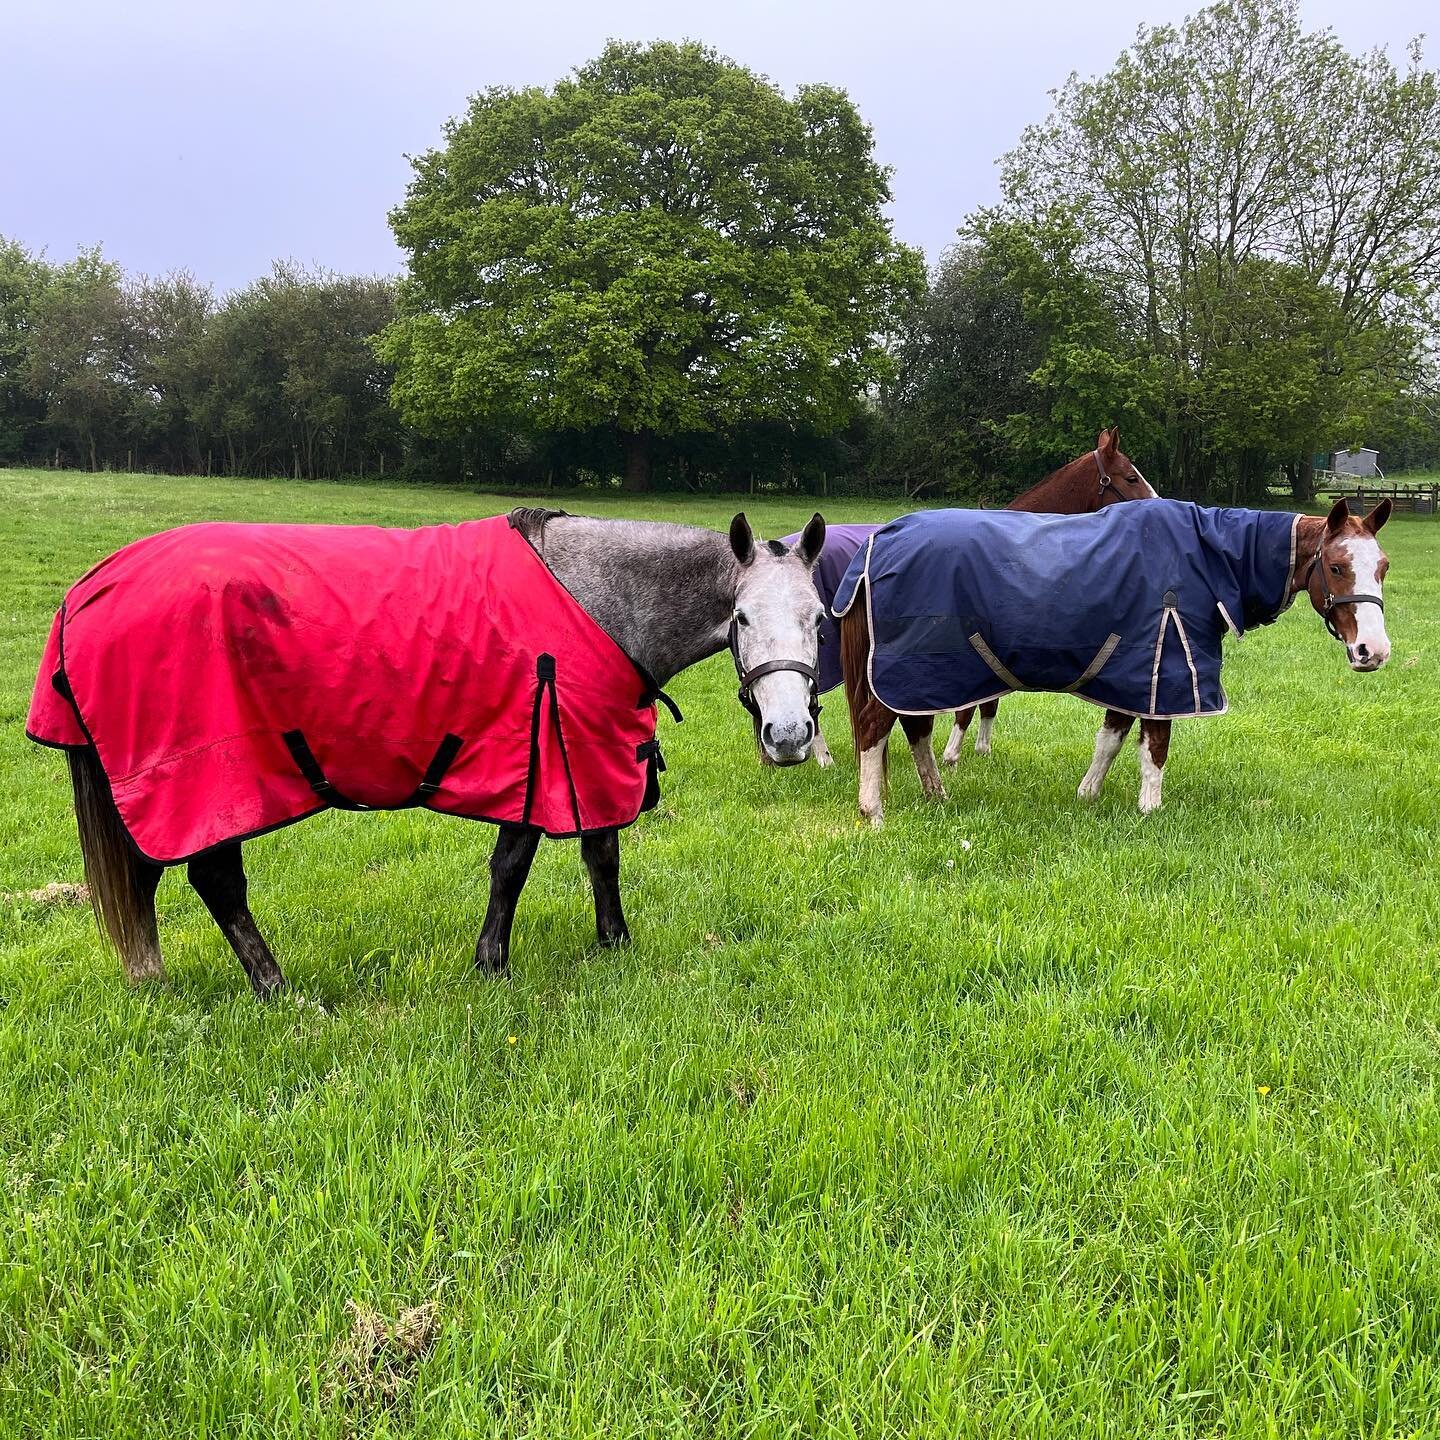 Fresh off the plane from Argentina ✈️ &amp; straight down to graze! We are beyond excited about our newest additions &amp; can&rsquo;t wait to introduce properly! 
.
.

.
.
.
#bishopsstortford #polopony #pololife #poloplayer #thoroughbreds #thoroughb